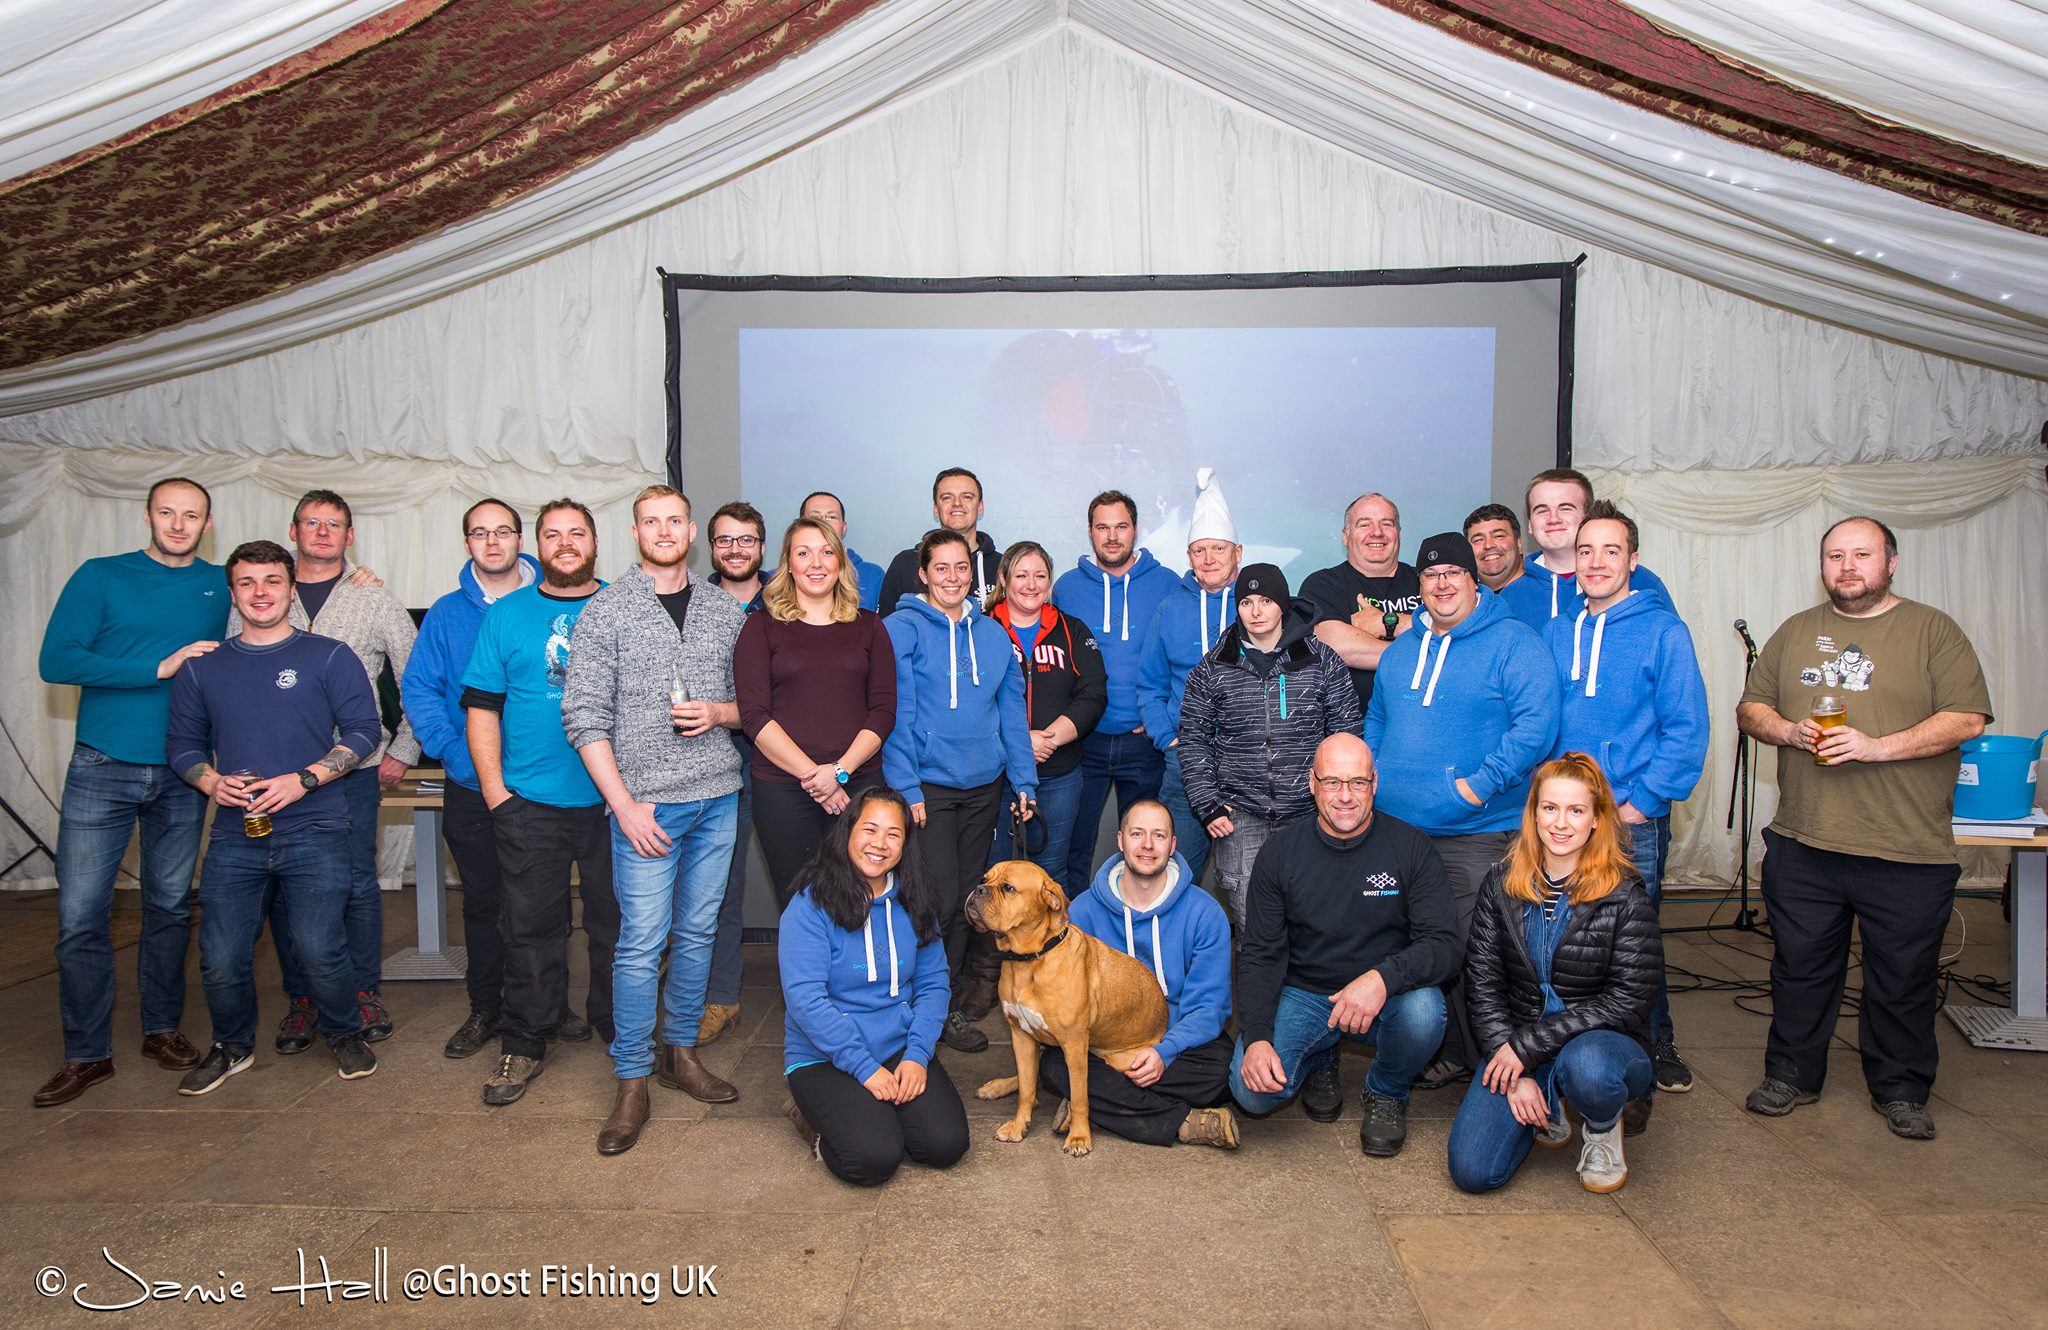 Ghost Fishing UK team at the Winter Warmer event, January 2019